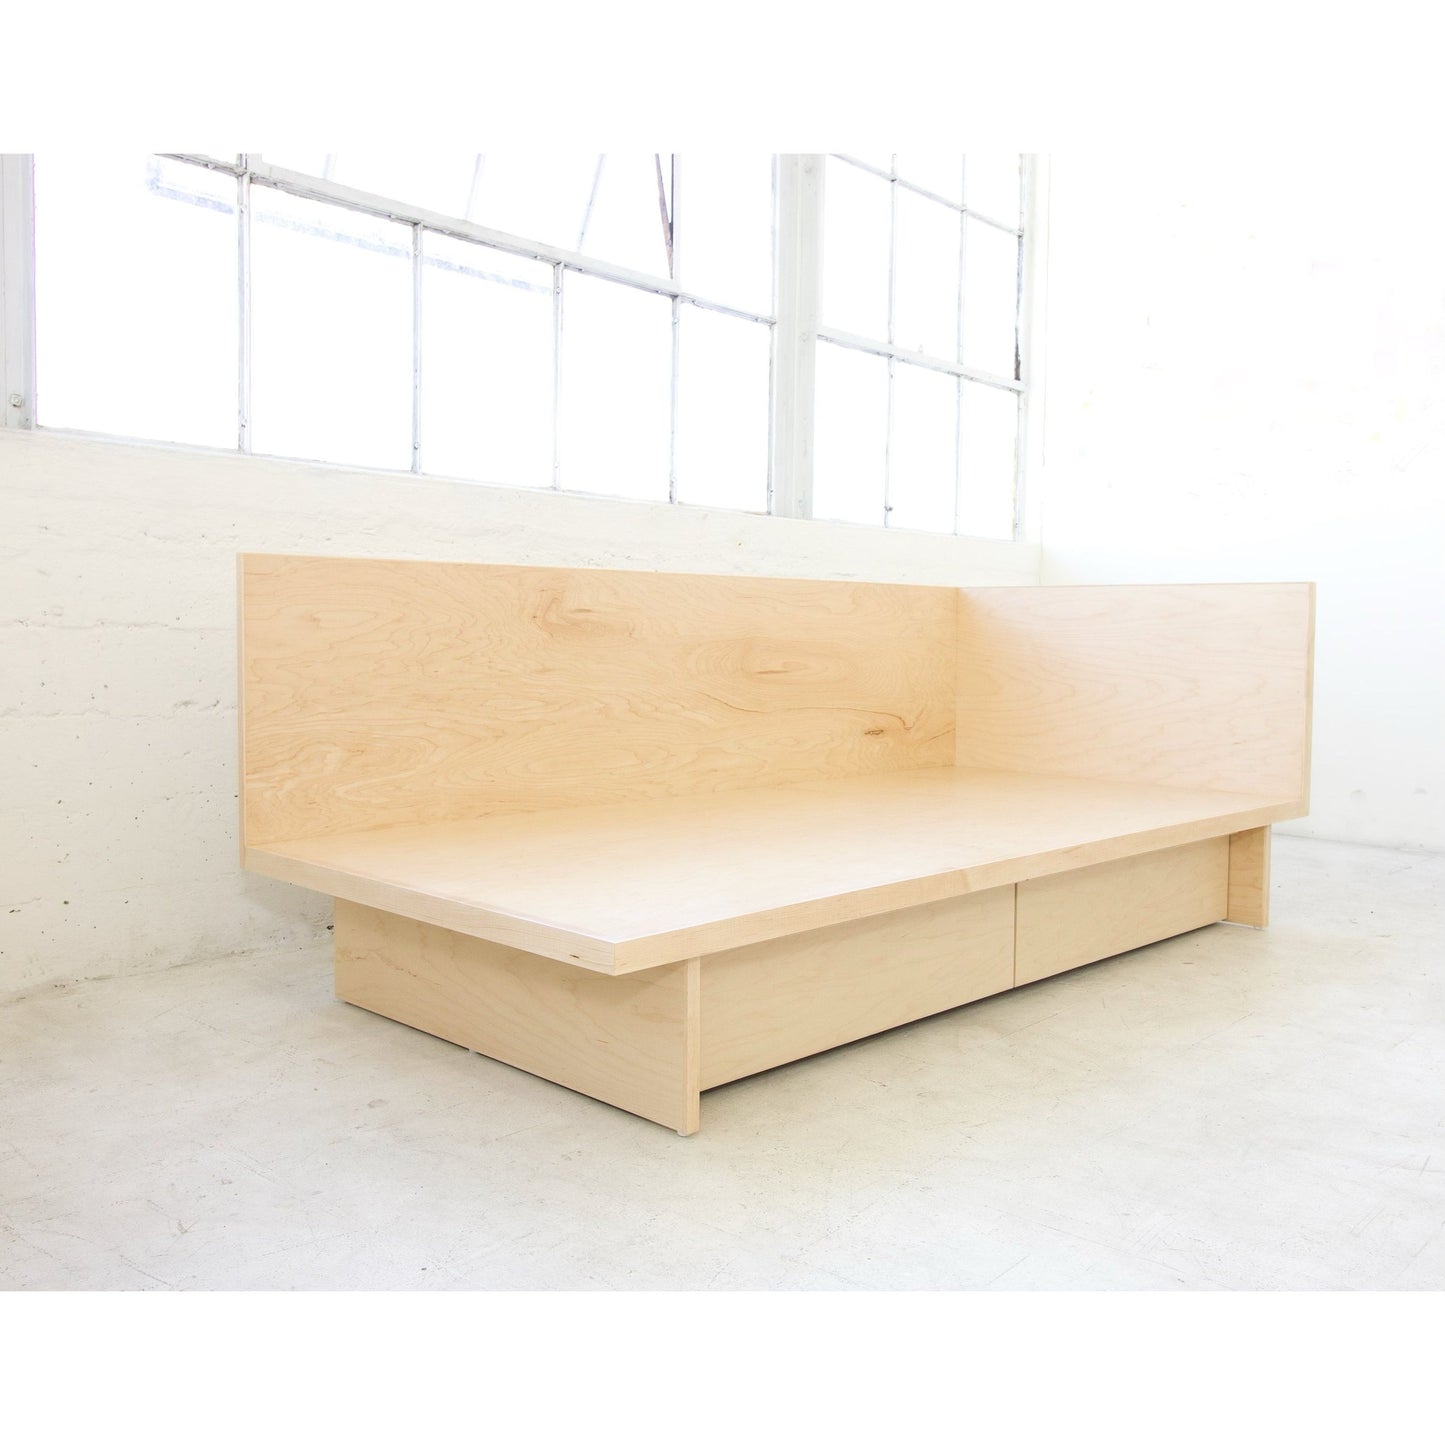 L-Shaped Daybed | Plywood Daybed | Daybed with storage | Made in LA | Twin bed